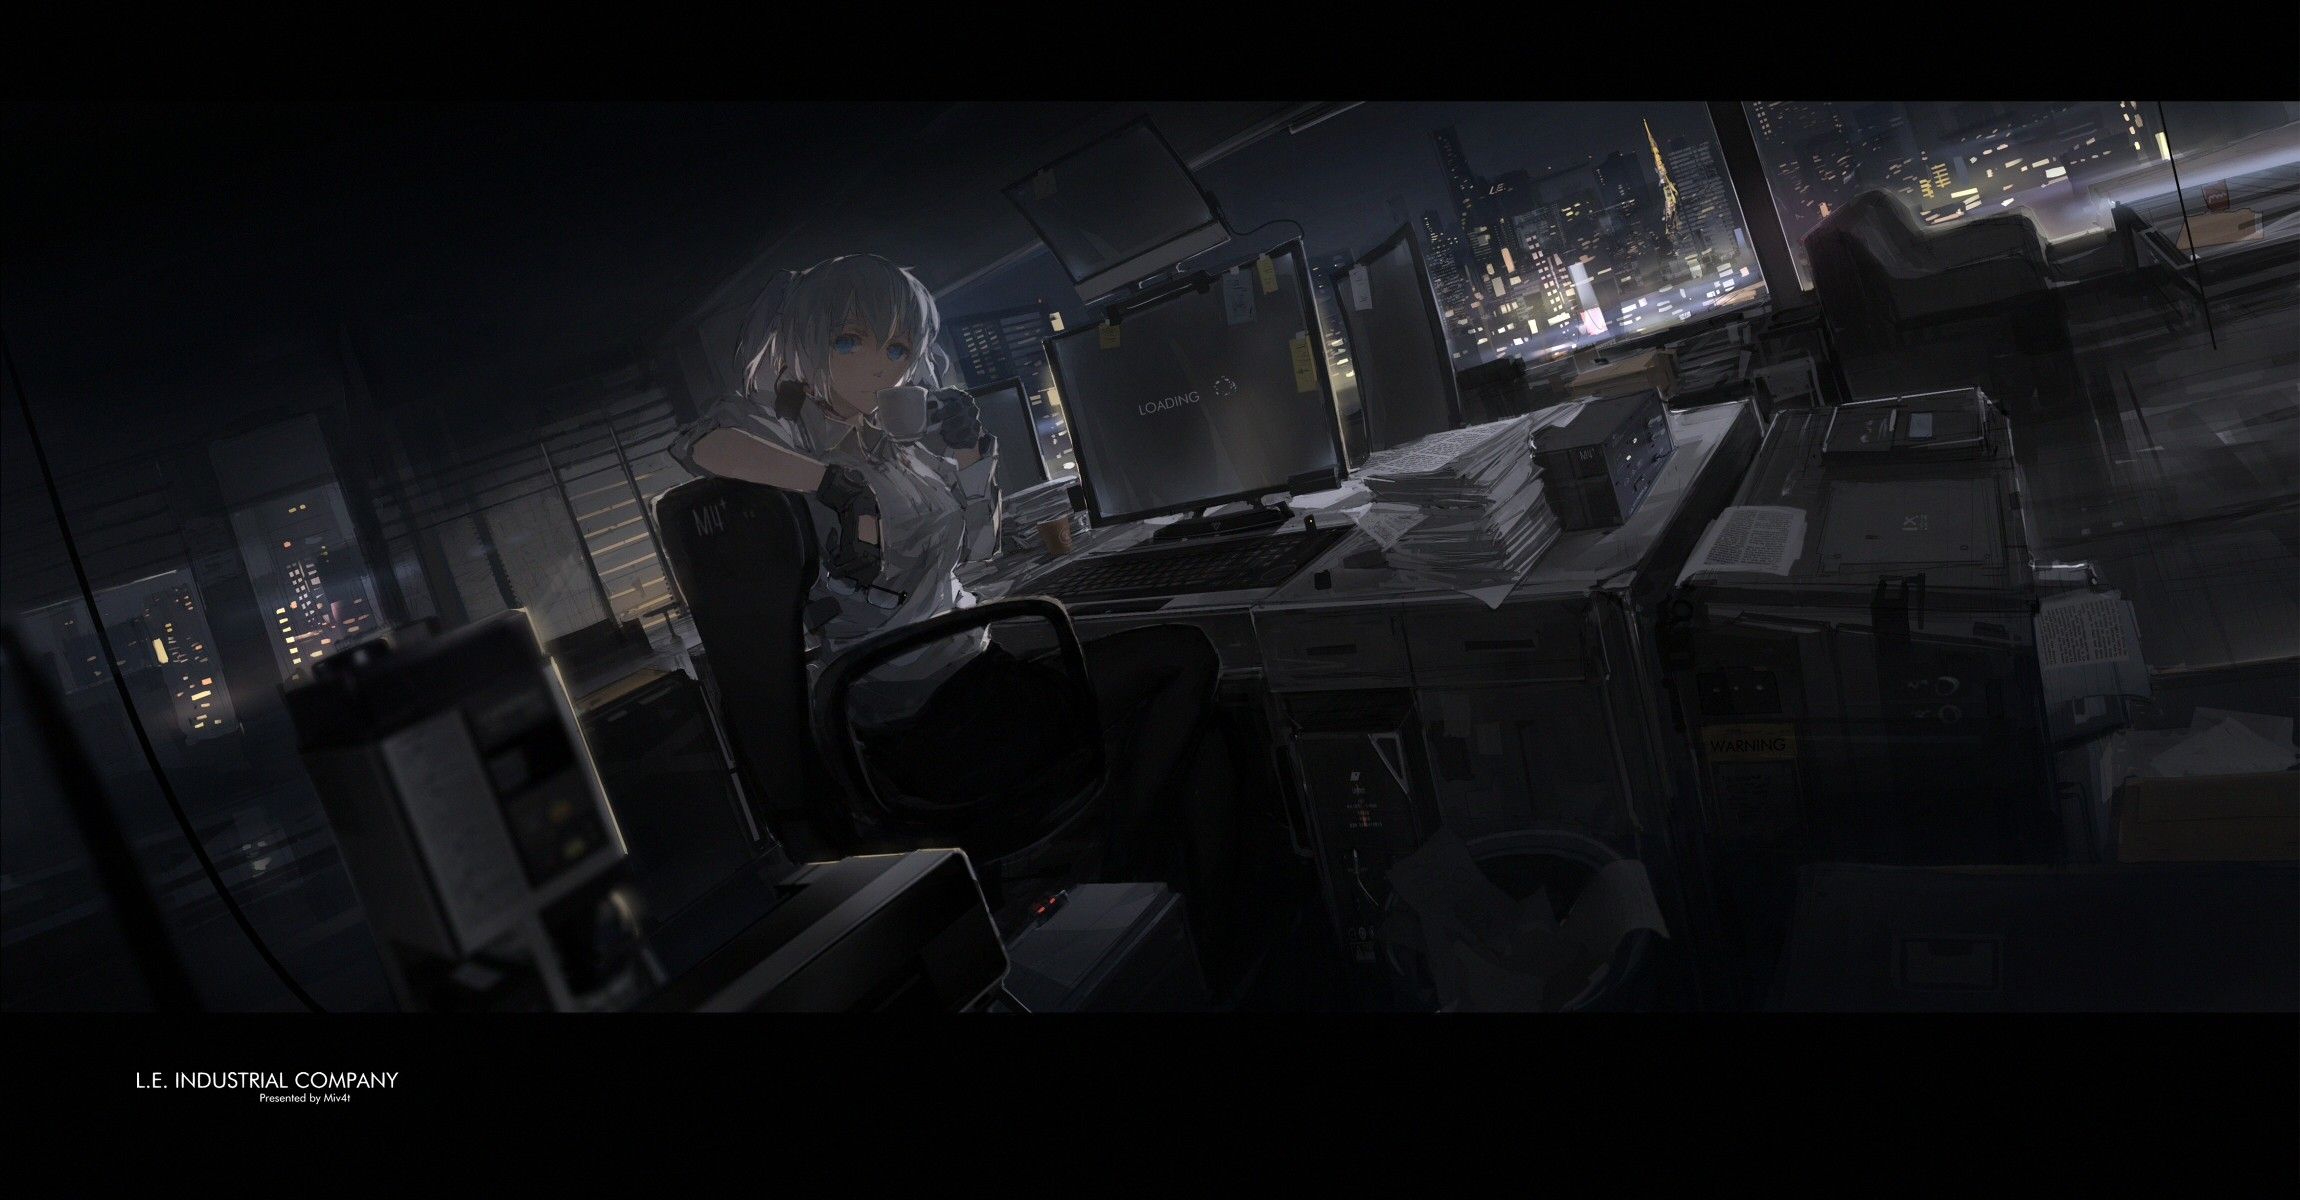 Wallpaper, window, city, night, white hair, anime girls, blue eyes, glasses, sitting, pantyhose, gloves, shirt, drink, office, skirt, original characters, twintails, paper, midnight, darkness, screenshot, computer wallpaper, pc game 2300x1200